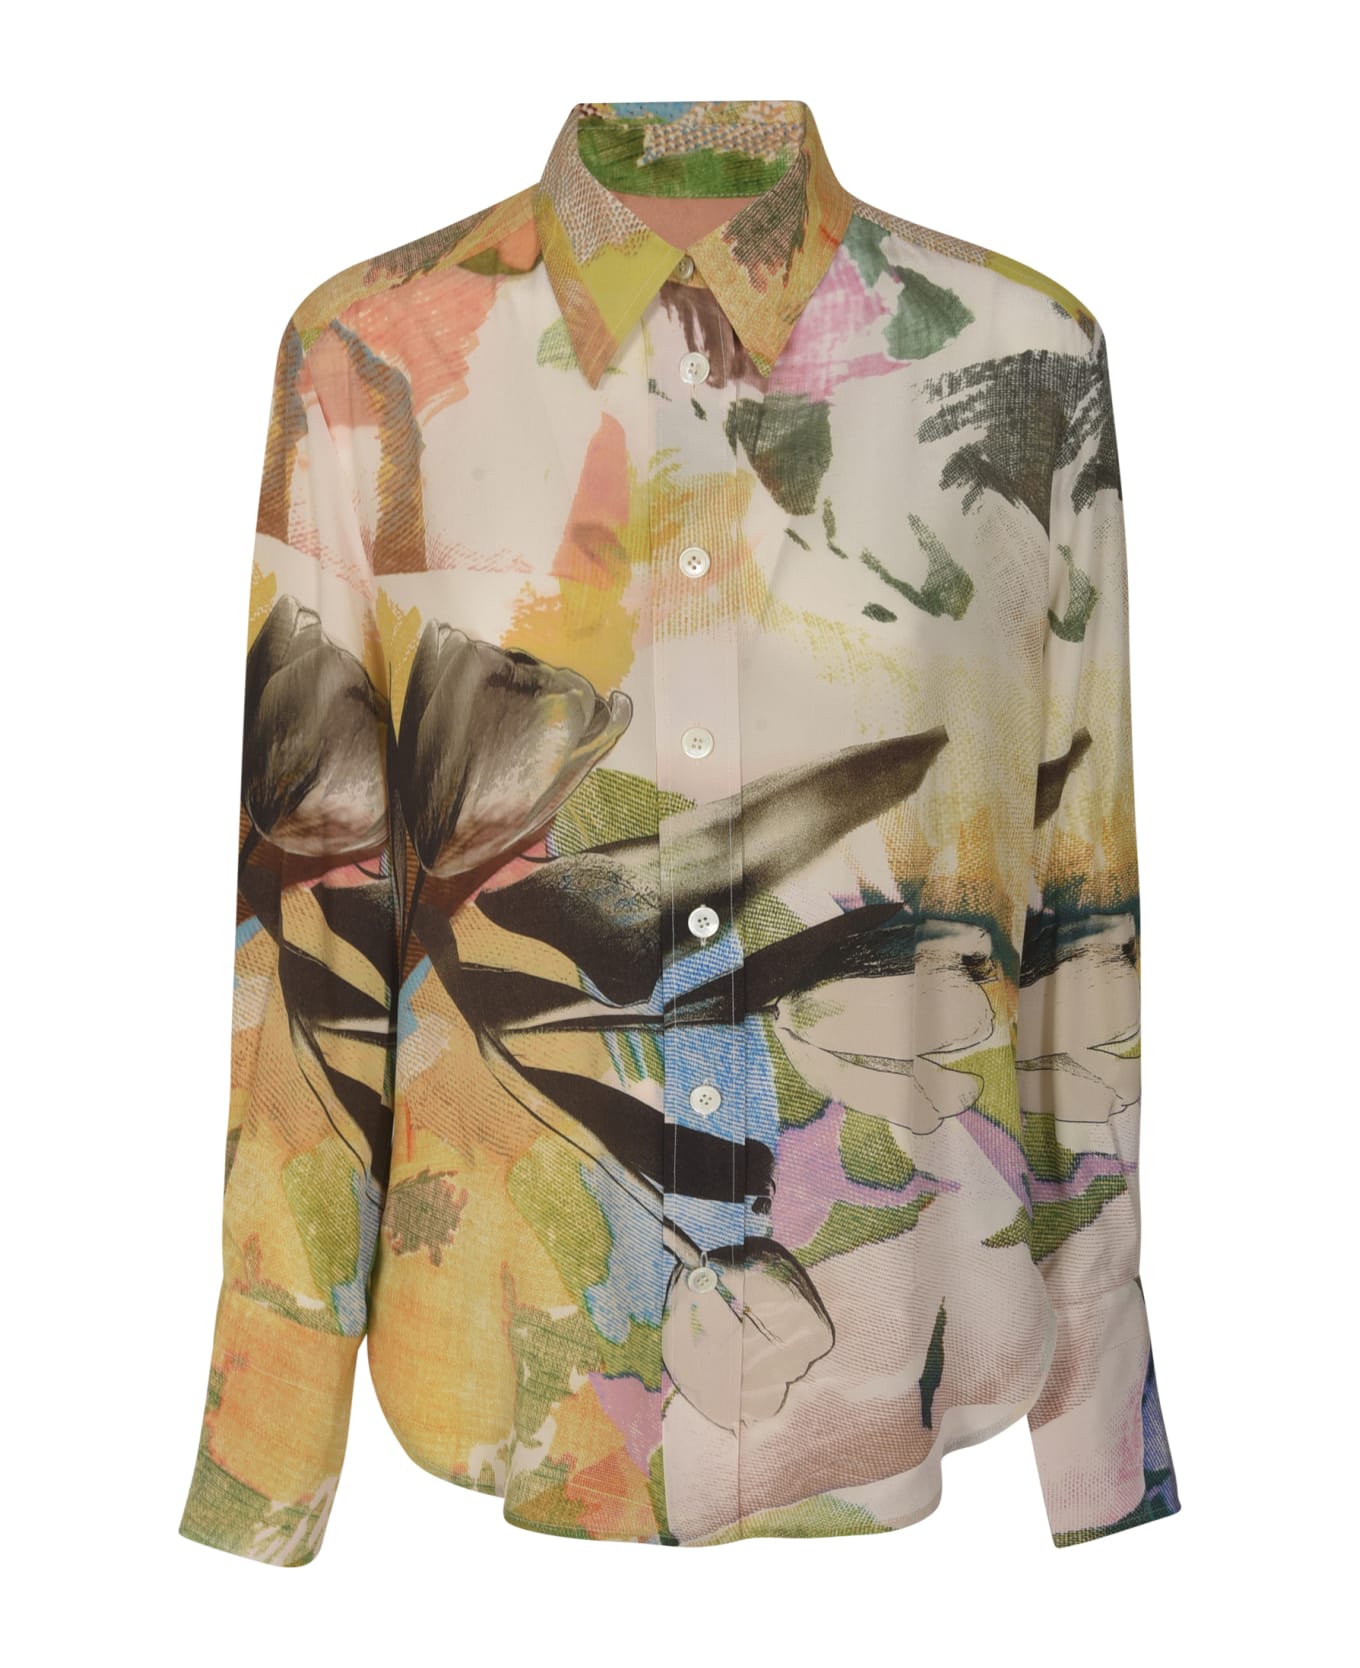 Paul Smith Round Hem All-over Printed Shirt - Multicolor